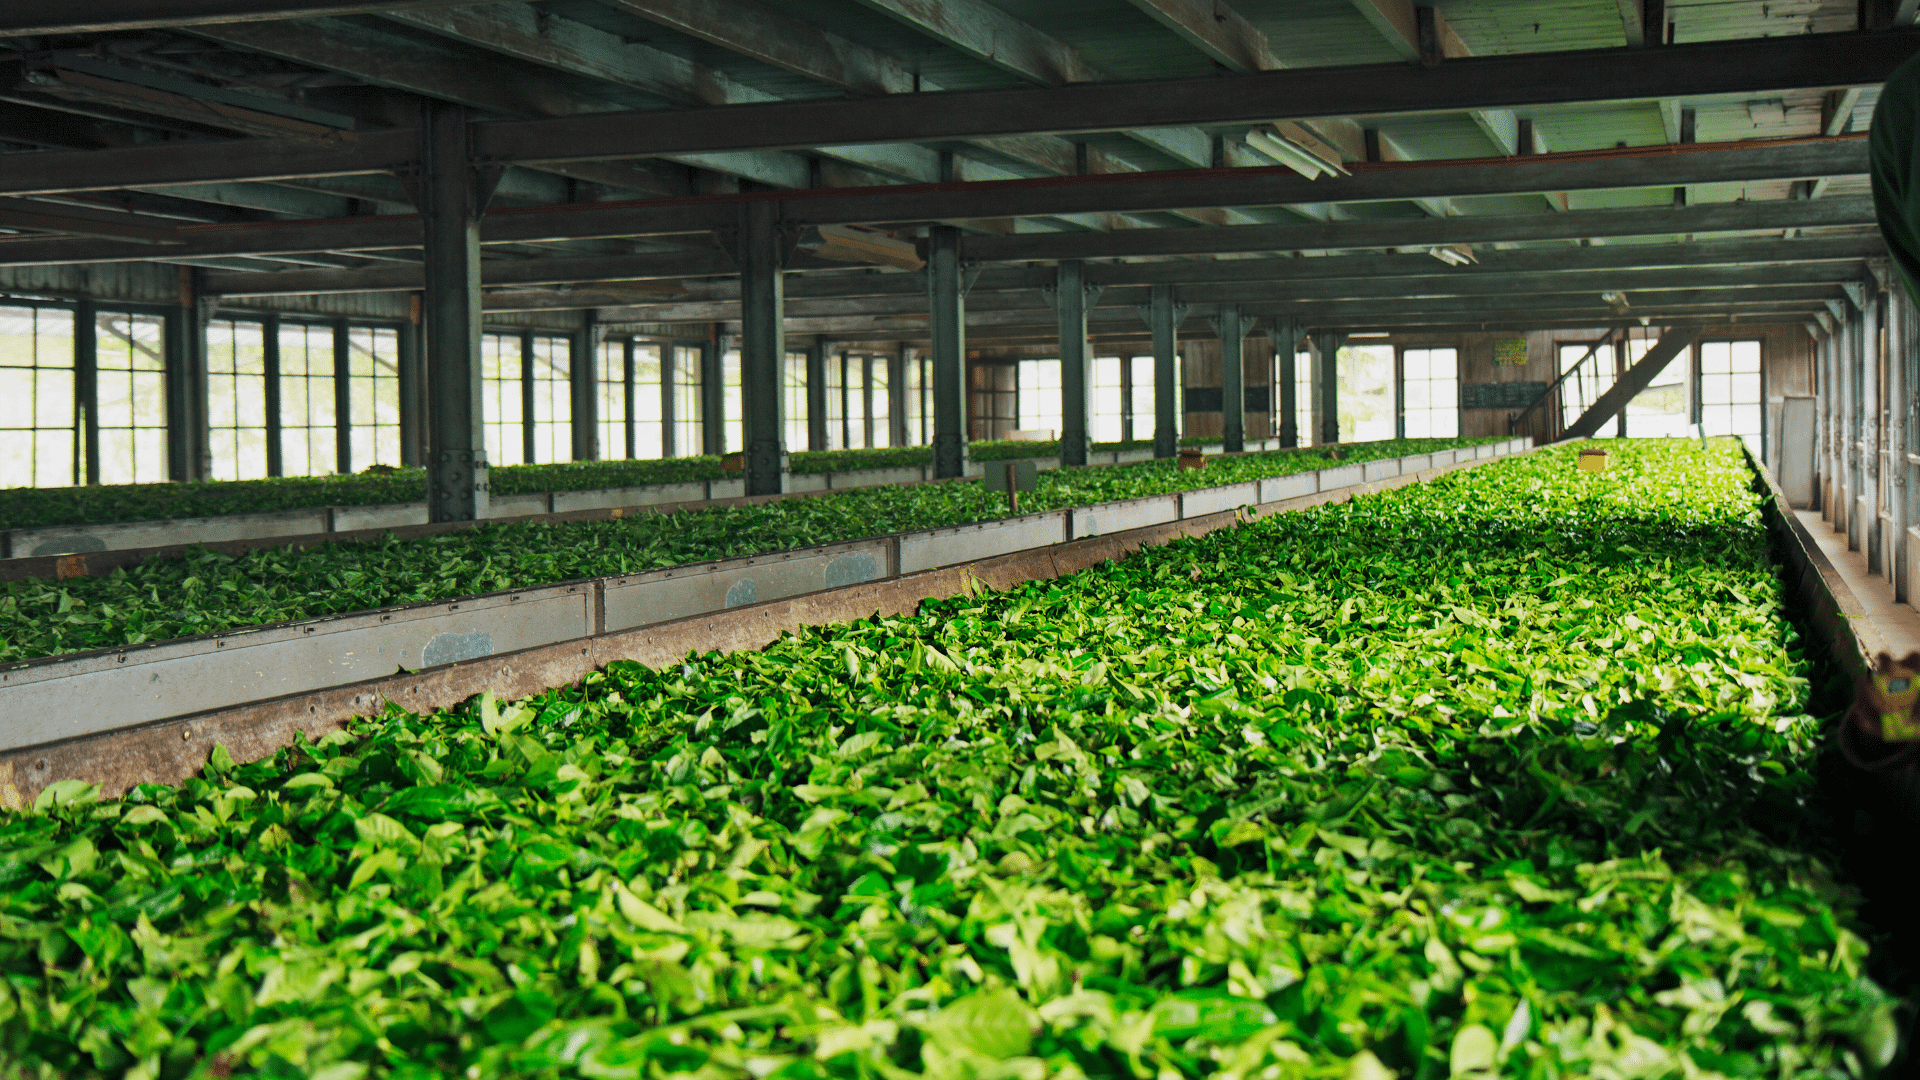 This picture shows how fresh white tea leaves that have been picked are laid down on big trays to wither